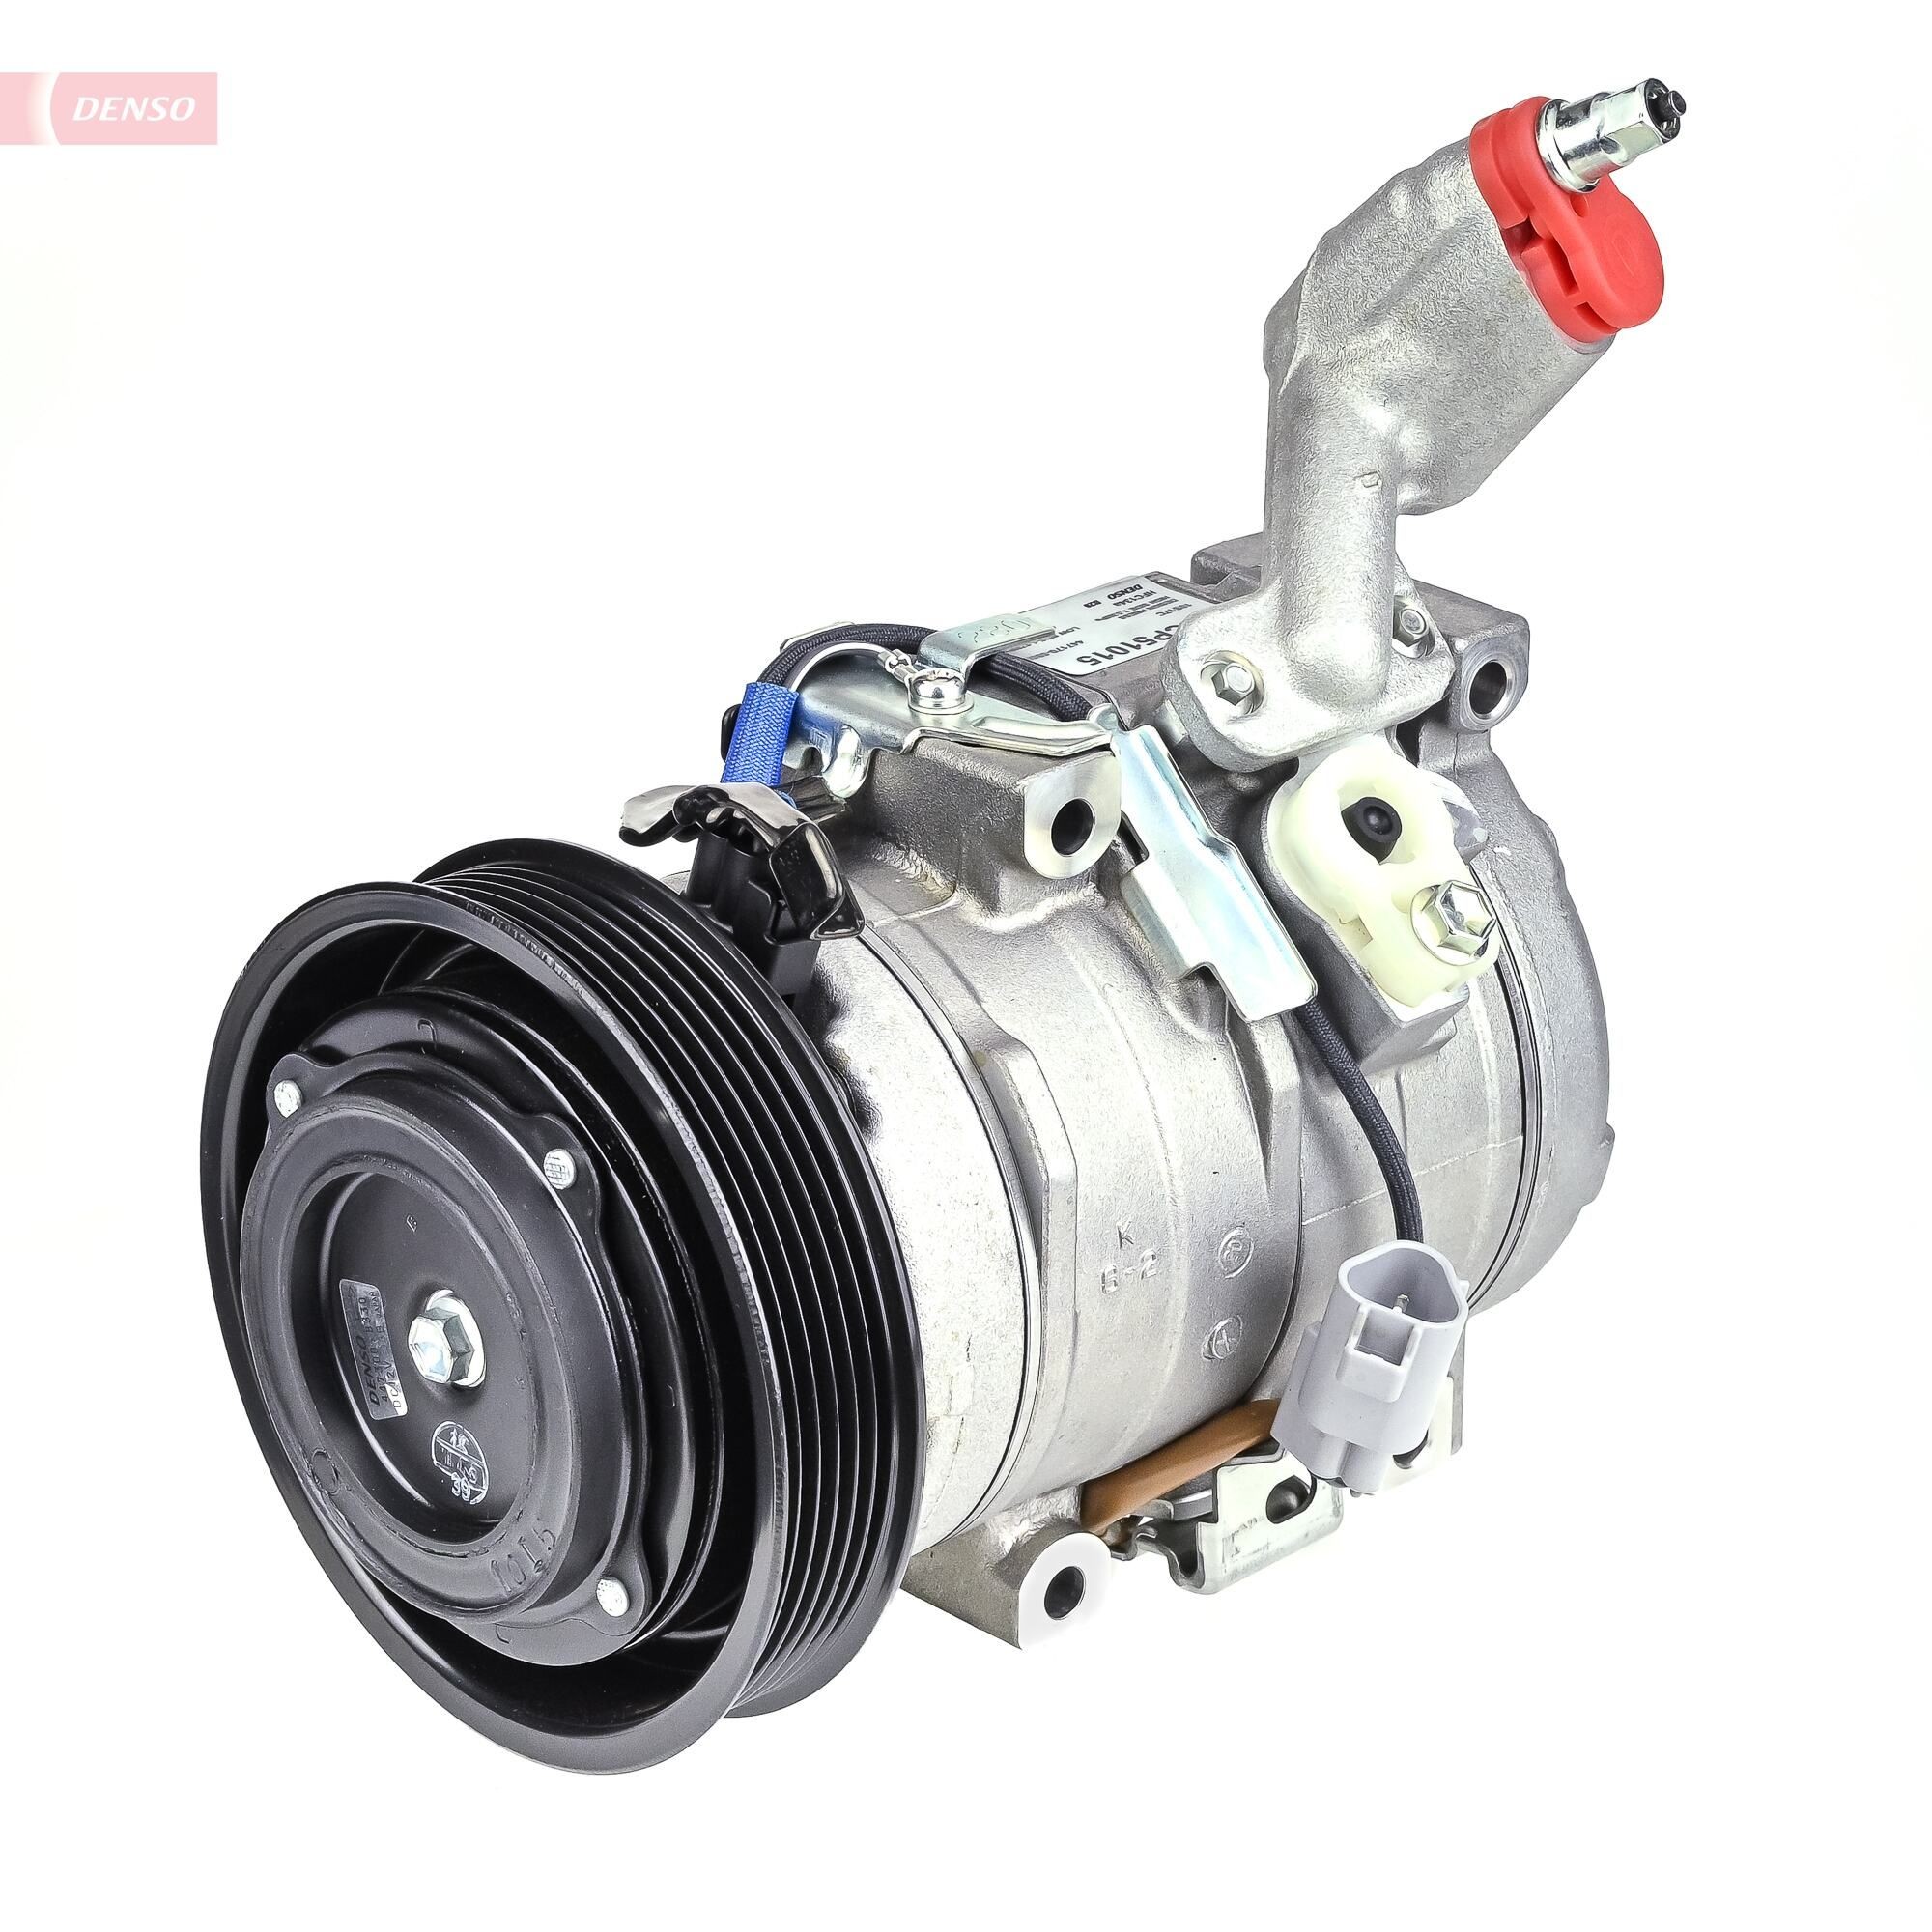 DENSO 10S17C, 12V, PAG 46, R 134a, with magnetic clutch Belt Pulley Ø: 130mm, Number of grooves: 6 AC compressor DCP51015 buy